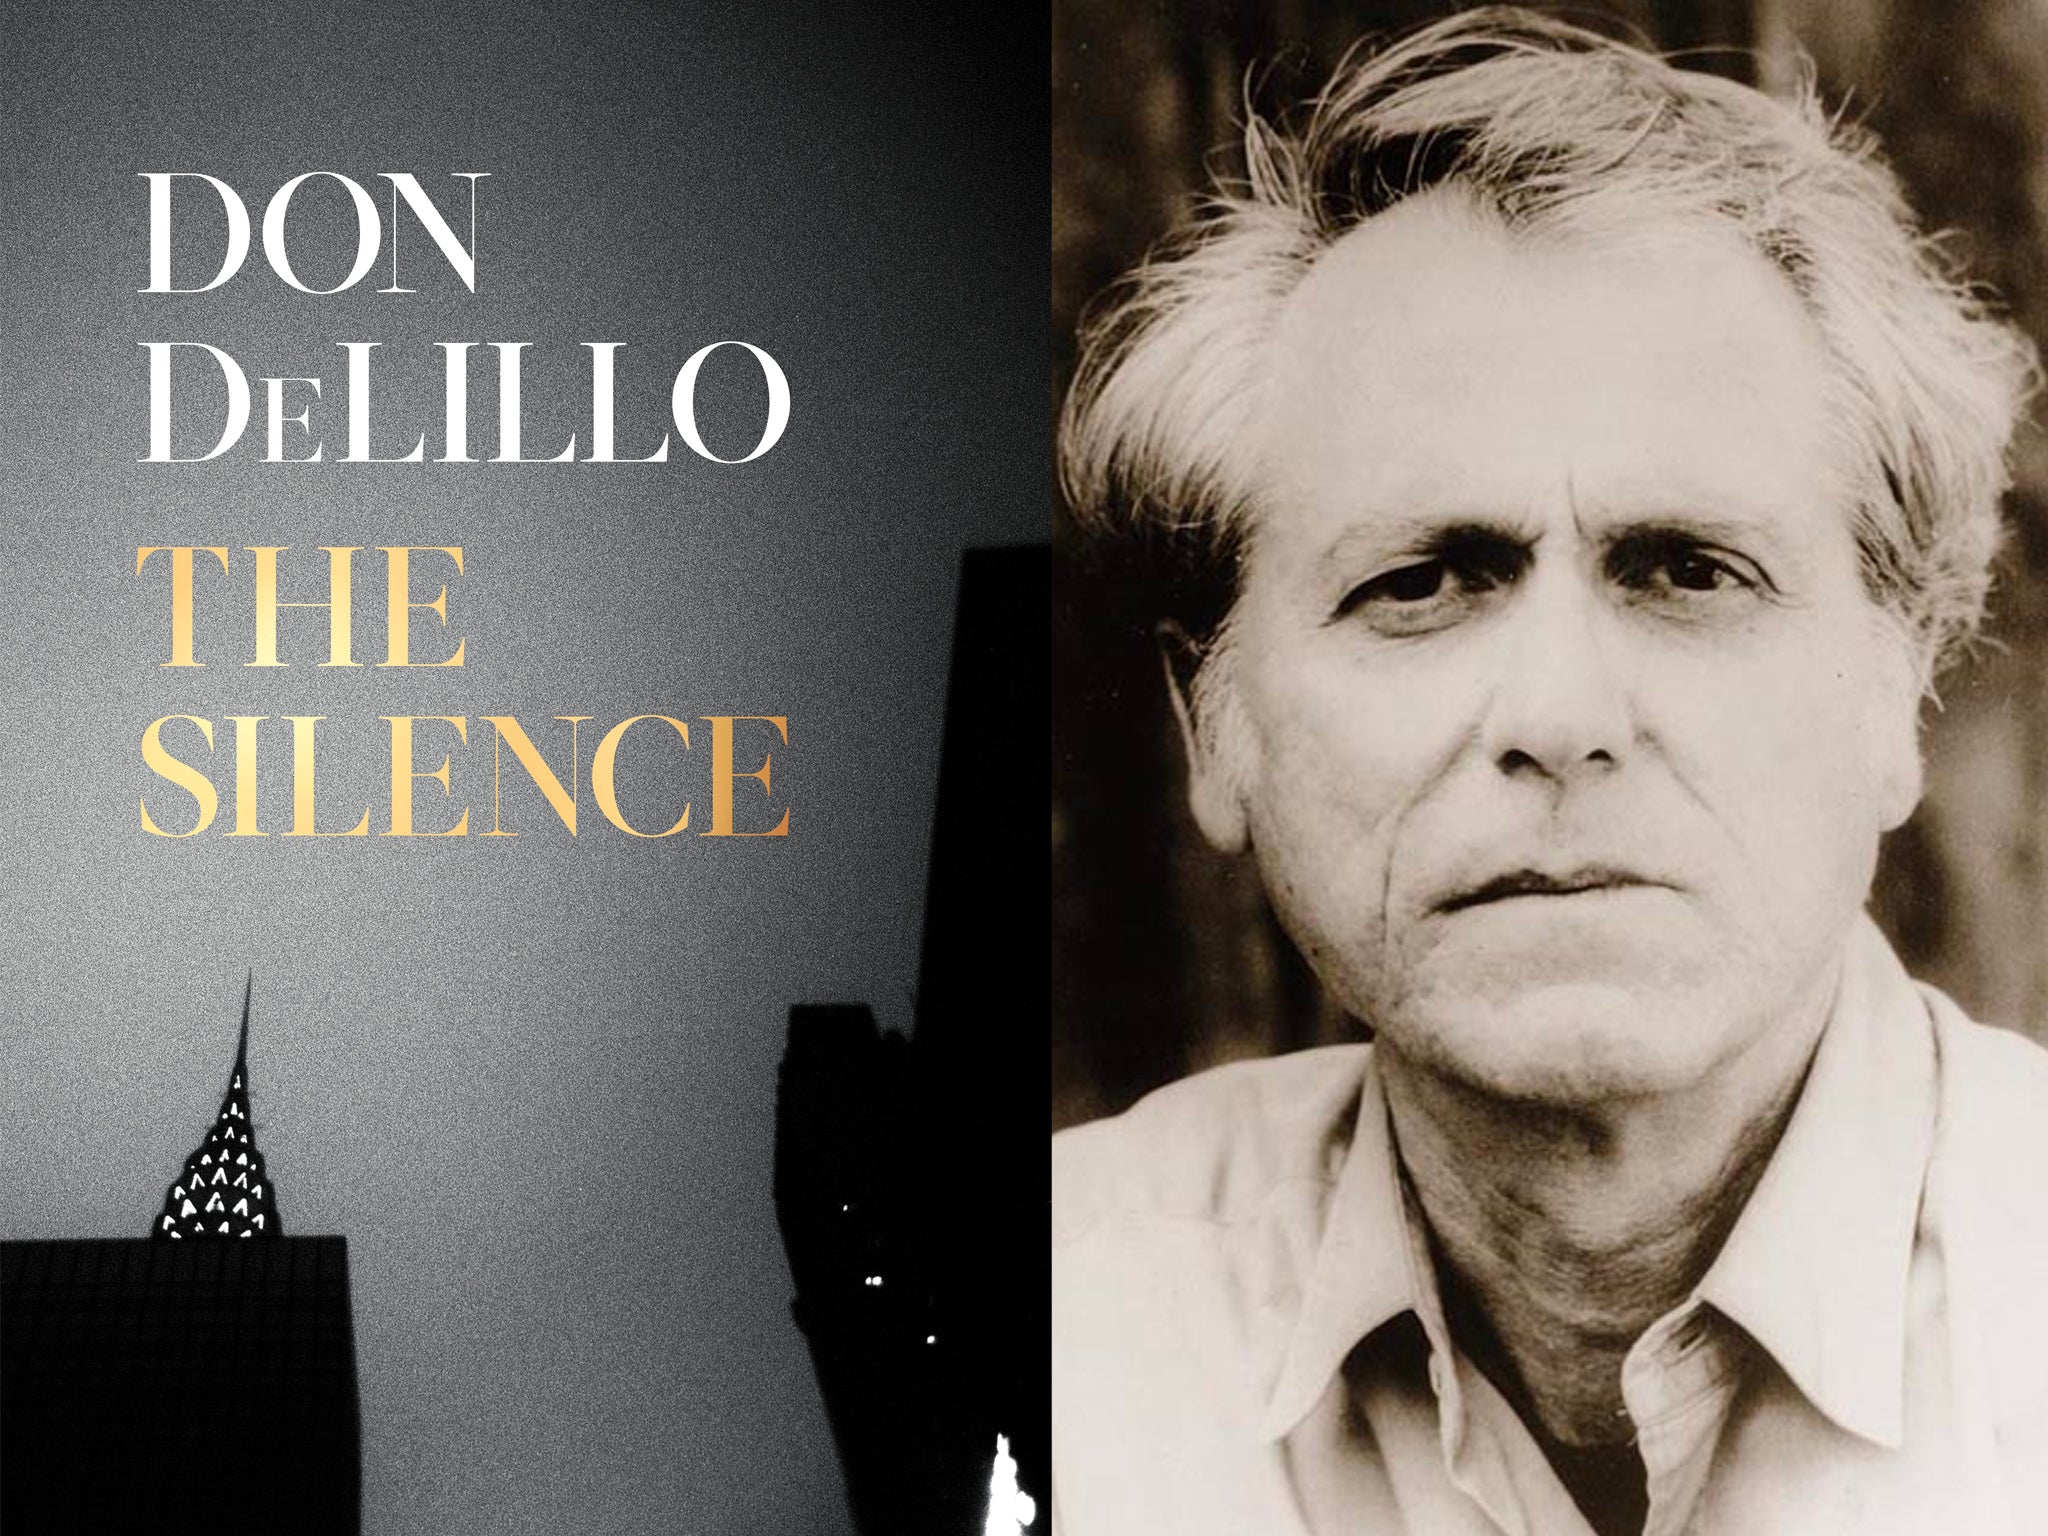 Don DeLillo’蝉 new work ‘The Silence’ contains the sort of prescient, disturbing observations that are enough to make anyone seriously worry about our future